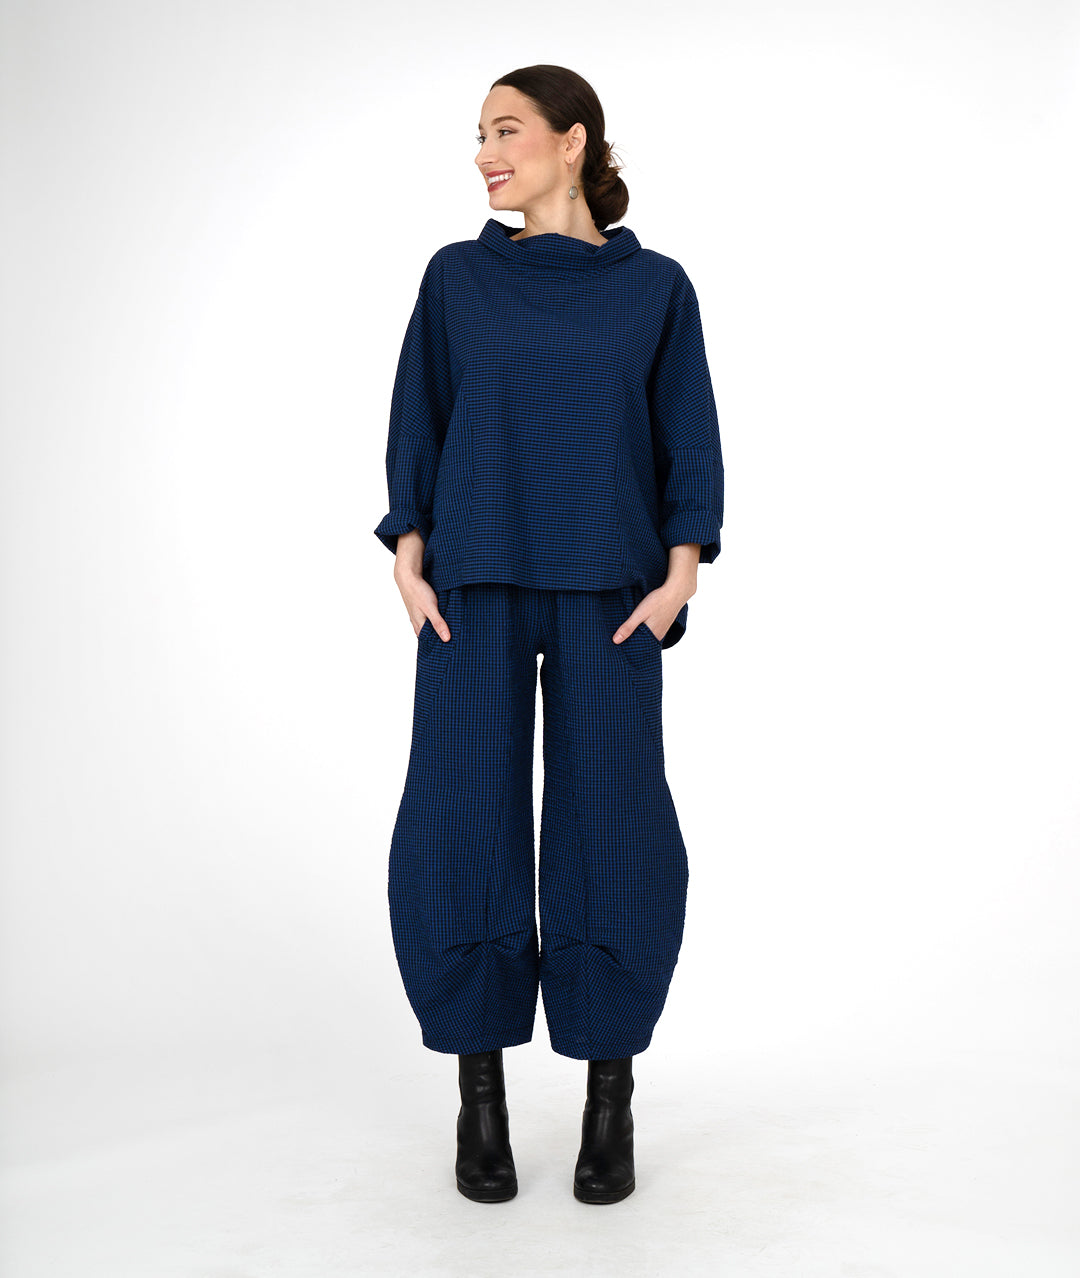 model in a boxy black and blue striped top with a cowl neck, worn with a wide leg pant in the same fabric with a tuck detail at either ankle